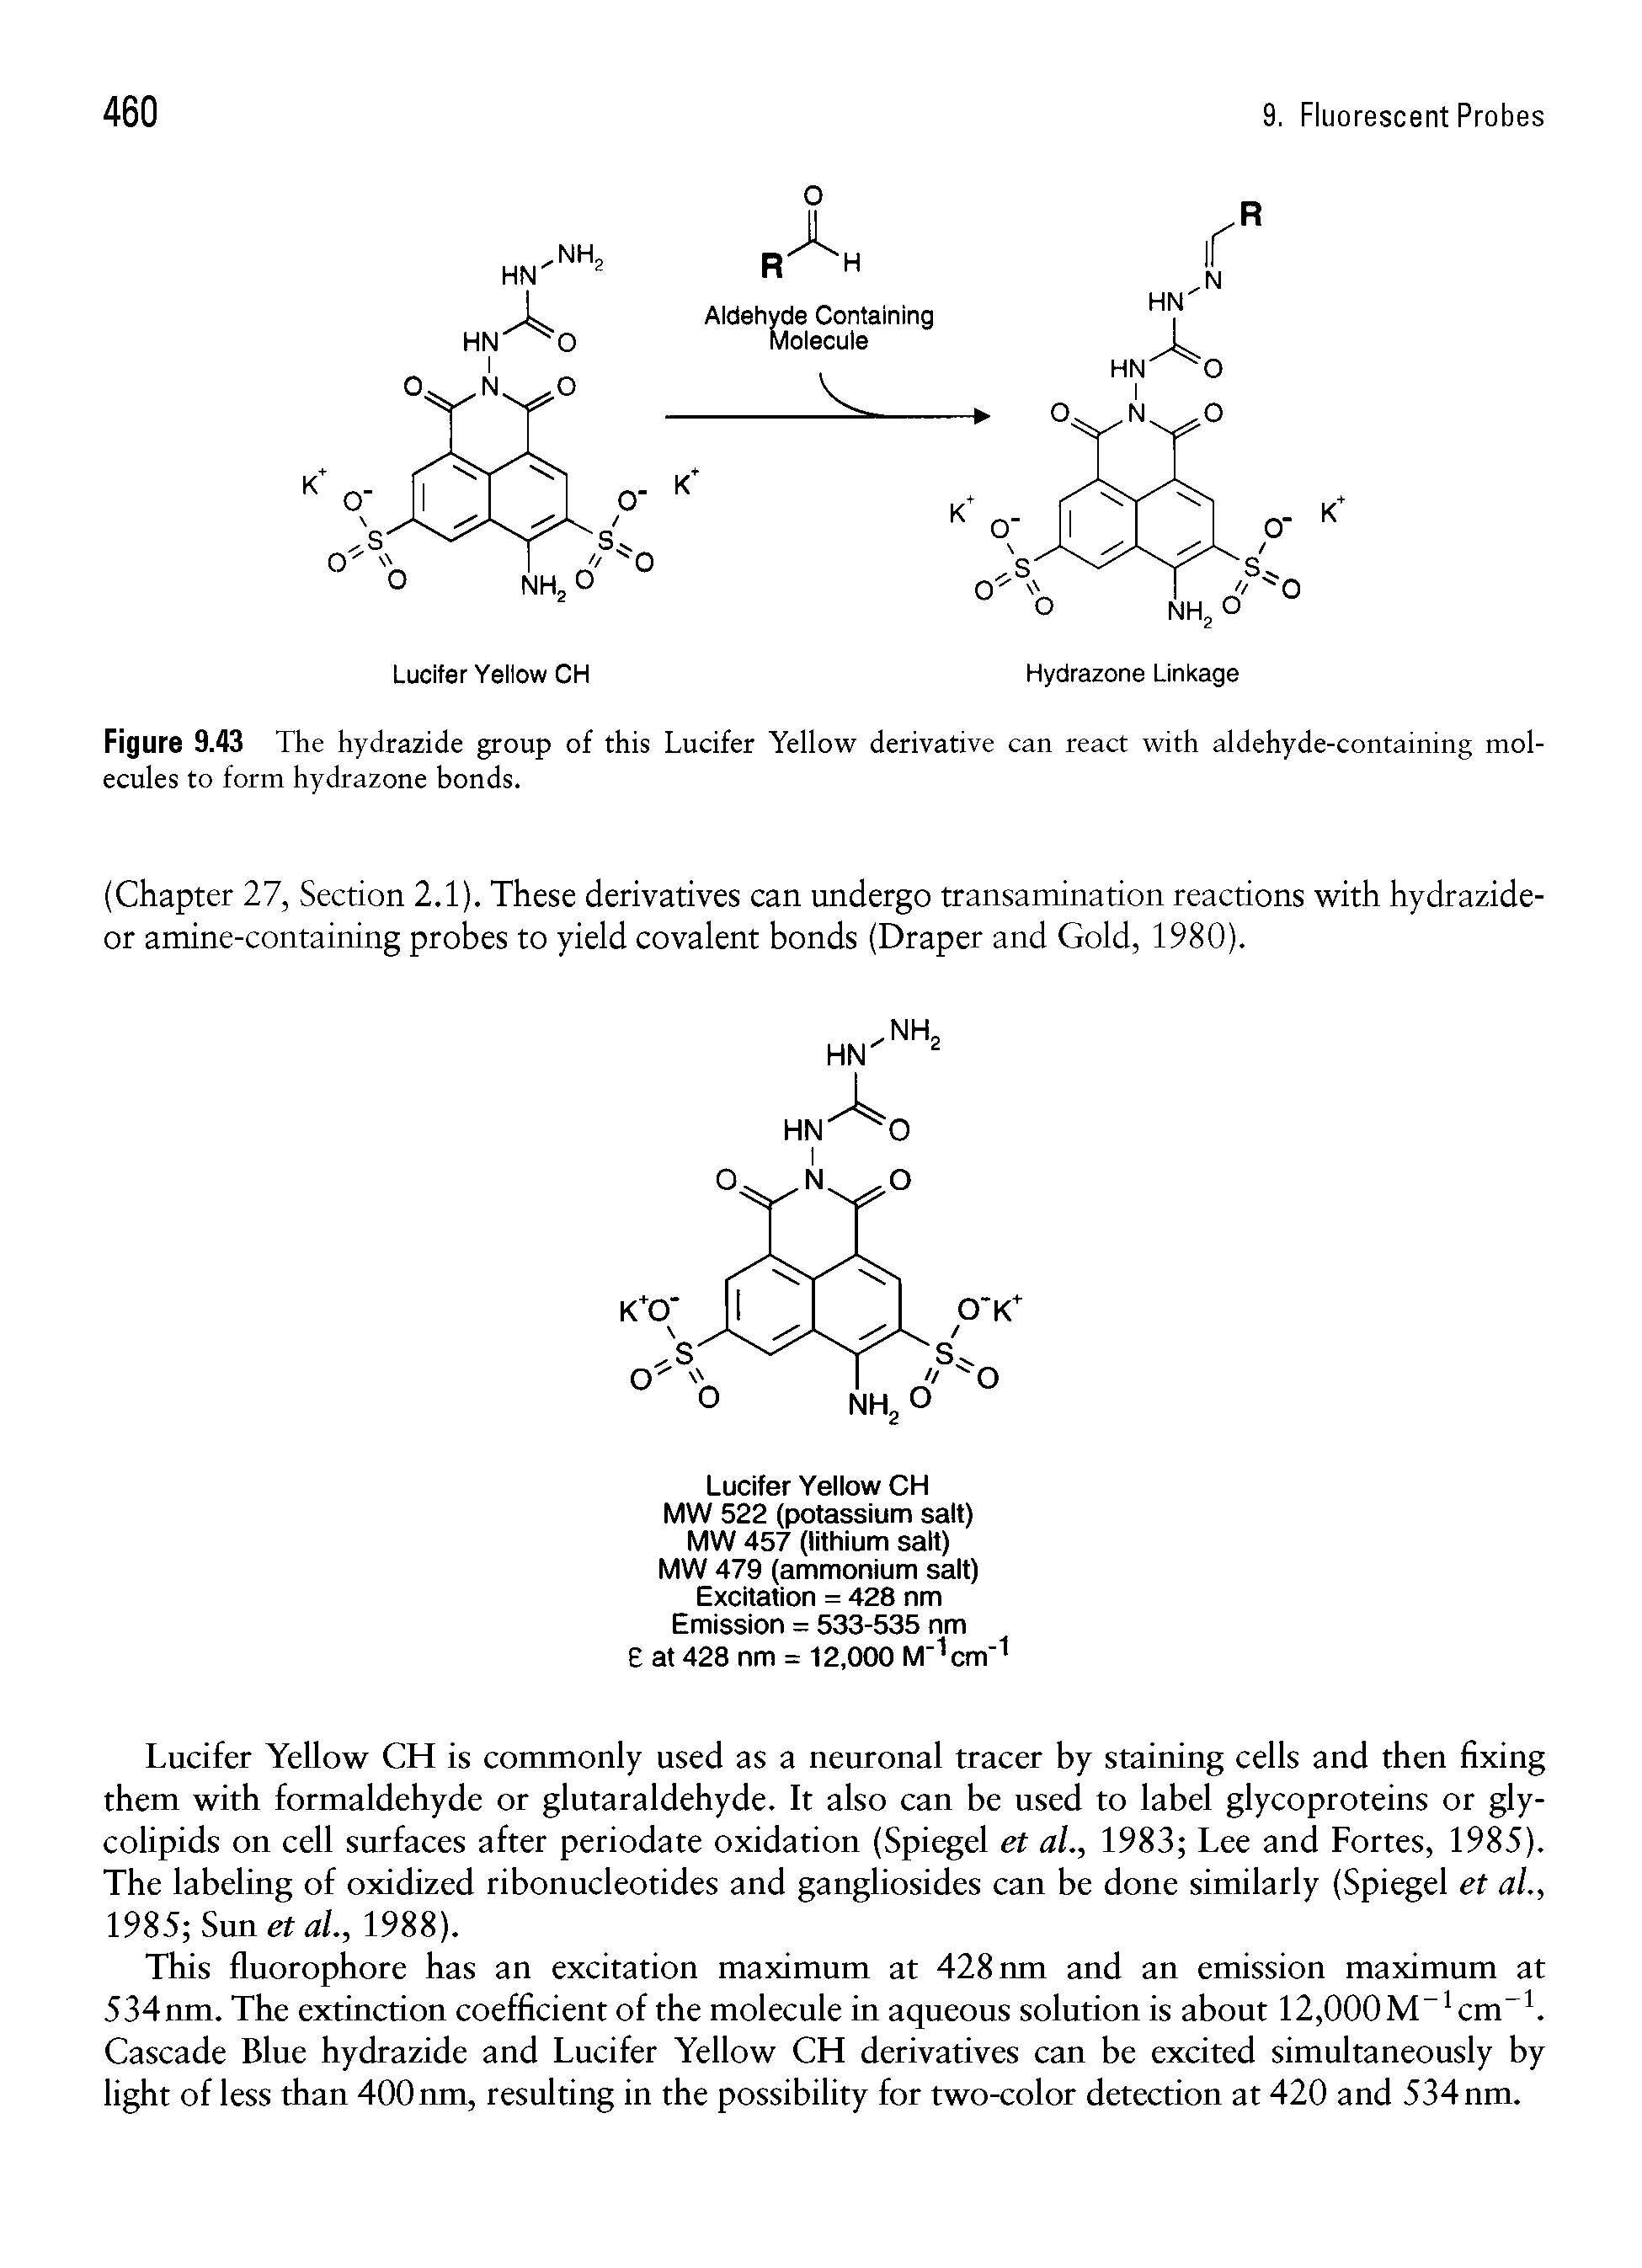 Figure 9.43 The hydrazide group of this Lucifer Yellow derivative can react with aldehyde-containing molecules to form hydrazone bonds.